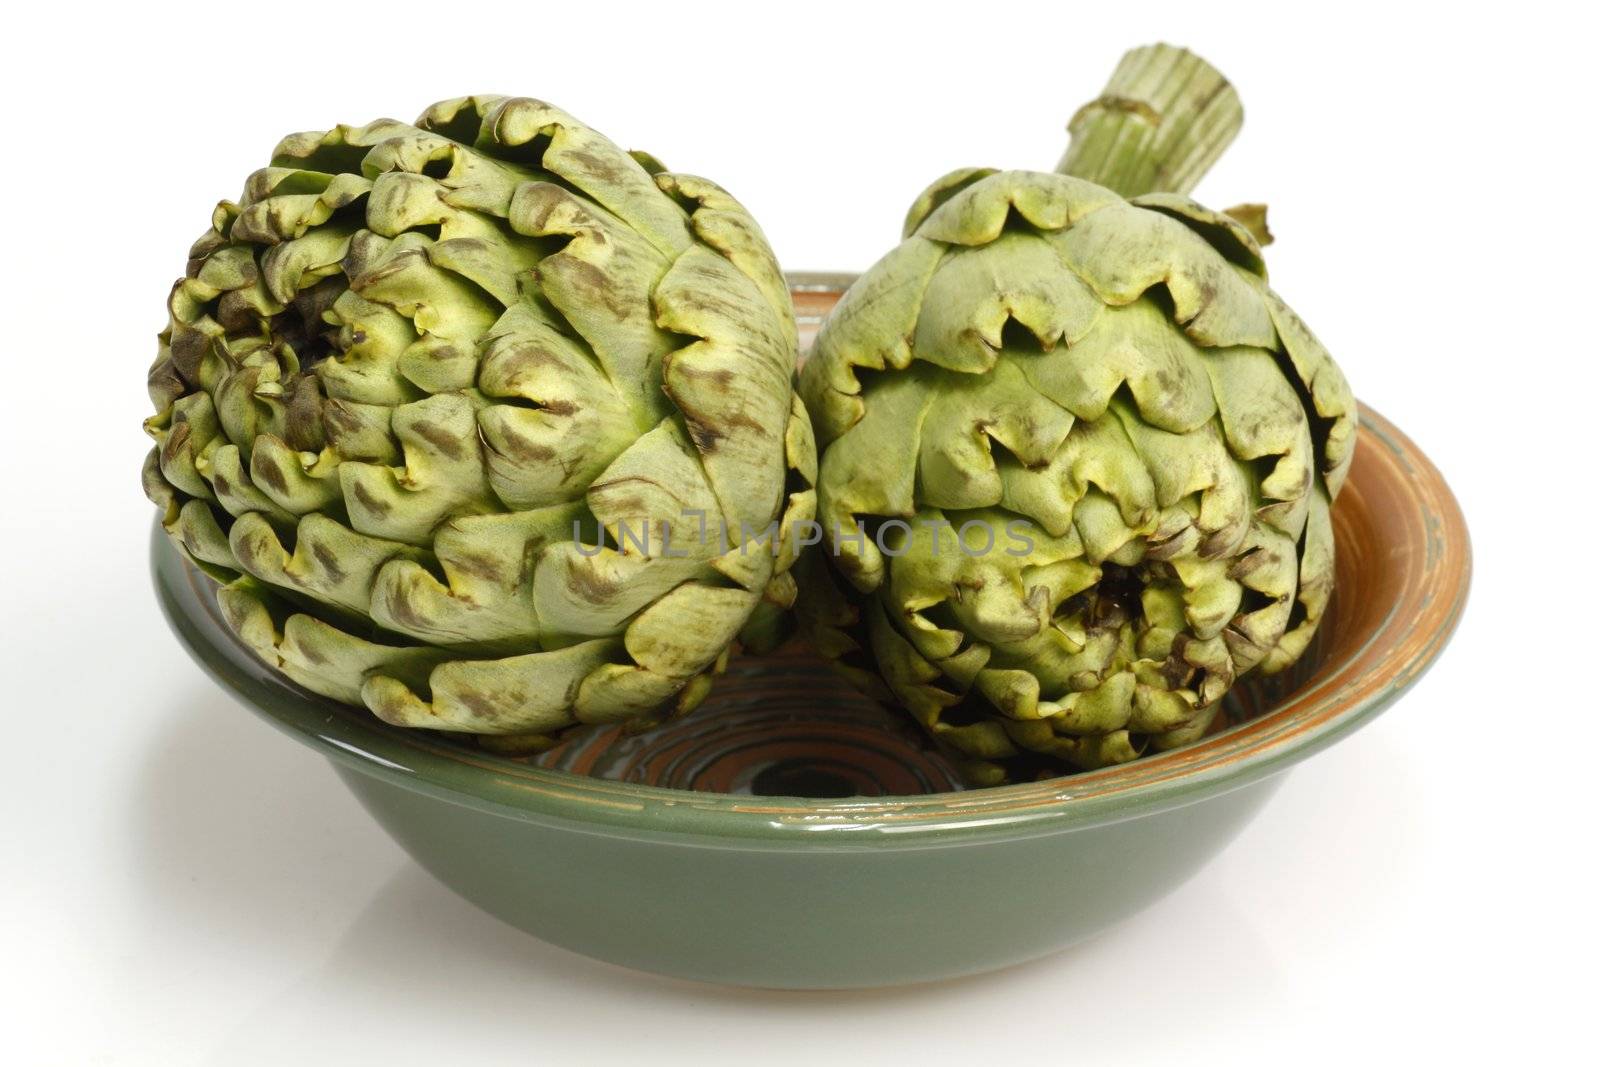 Two fresh artichokes in a bowl over white background